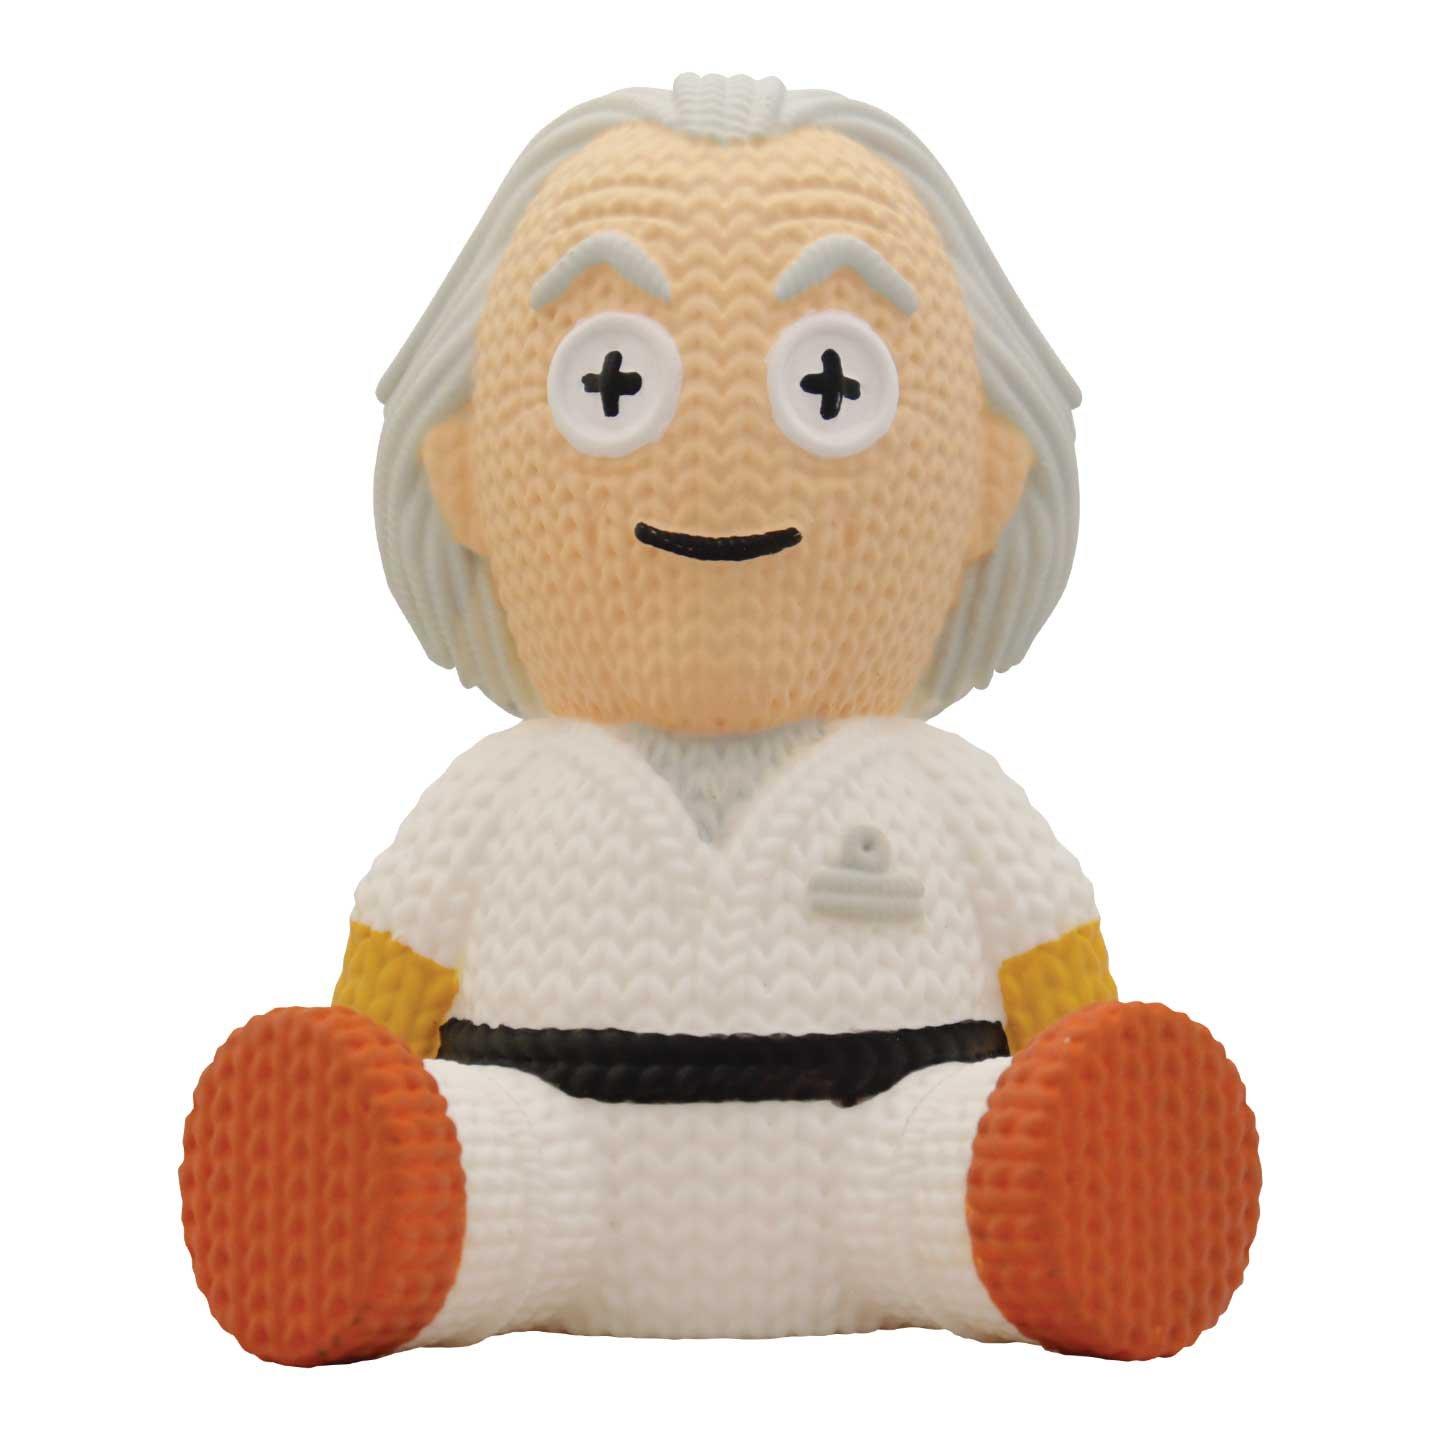 Doc Brown Collectible Vinyl Figure from Handmade by Robots